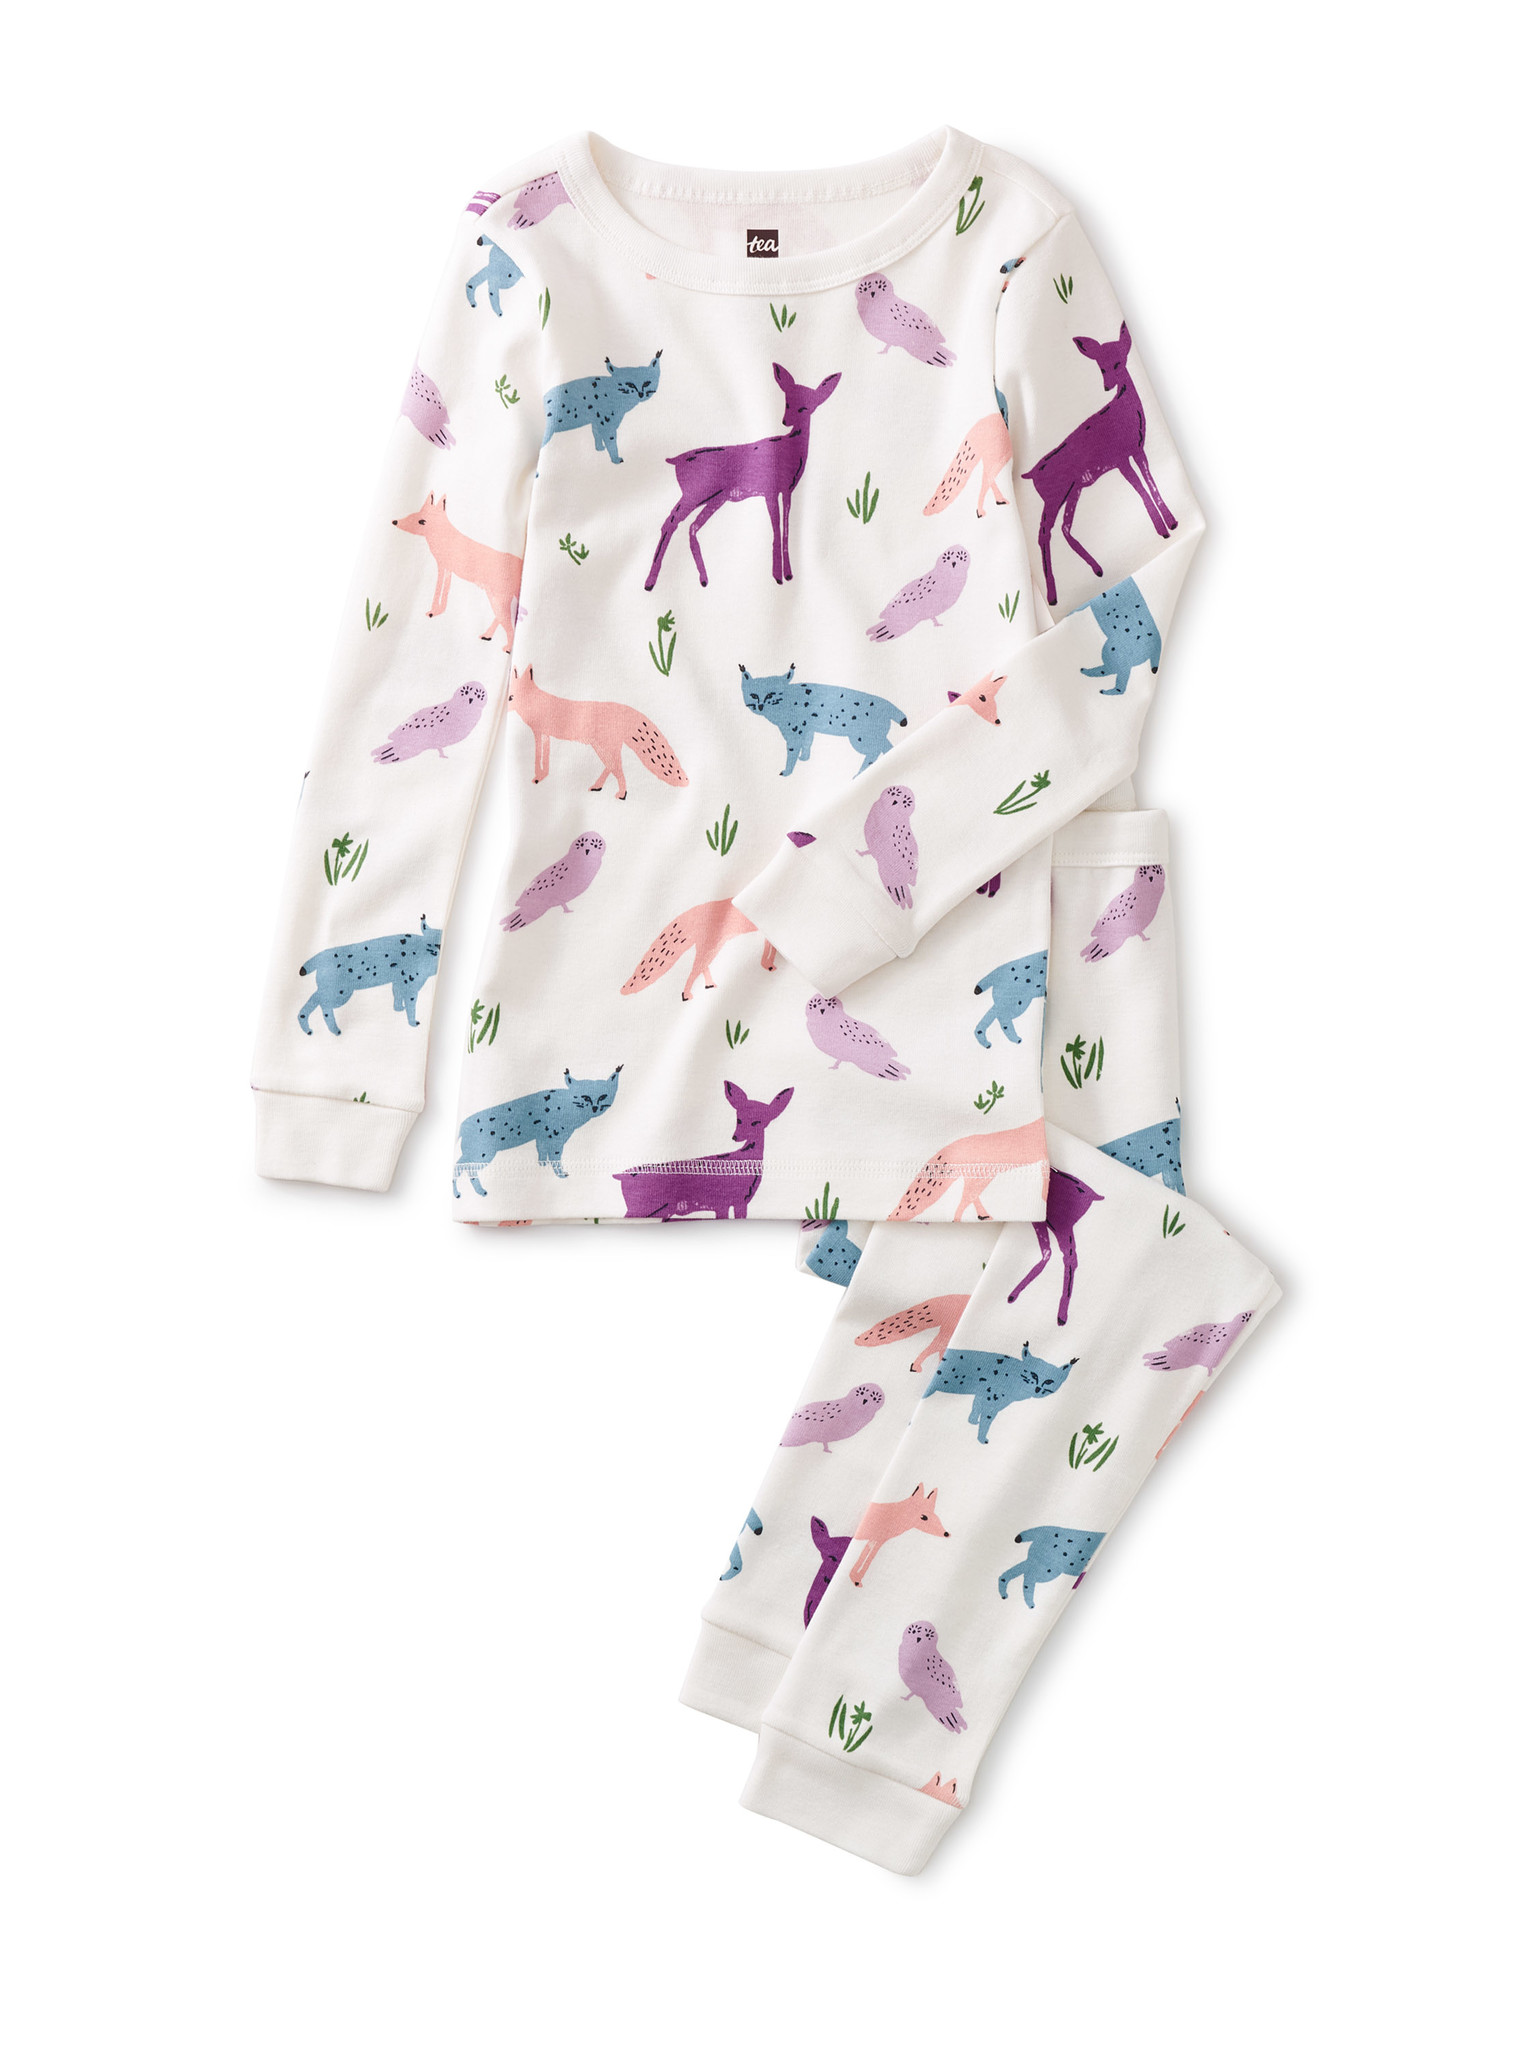 Tea Collection Tea Collection Cotton Footed Pajamas - Lapland Forest Friends